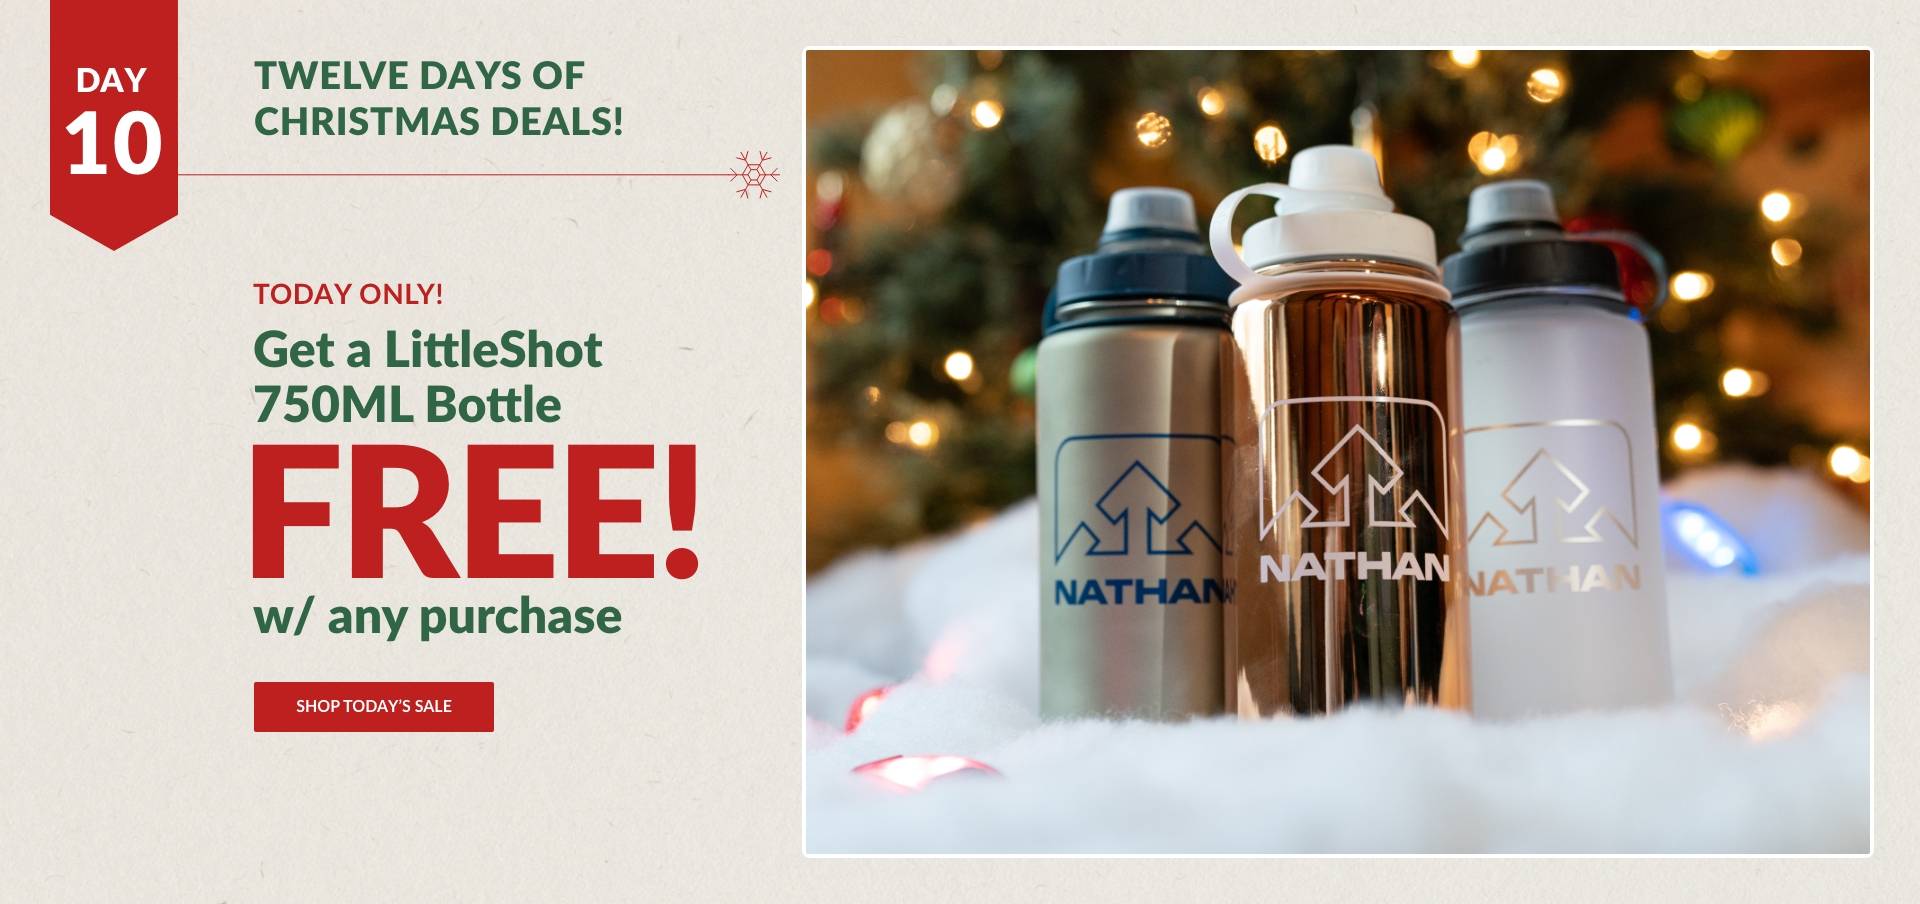 Today Only! Free LittleShot 750ML Bottle with any Purchase Shop Today's Sale